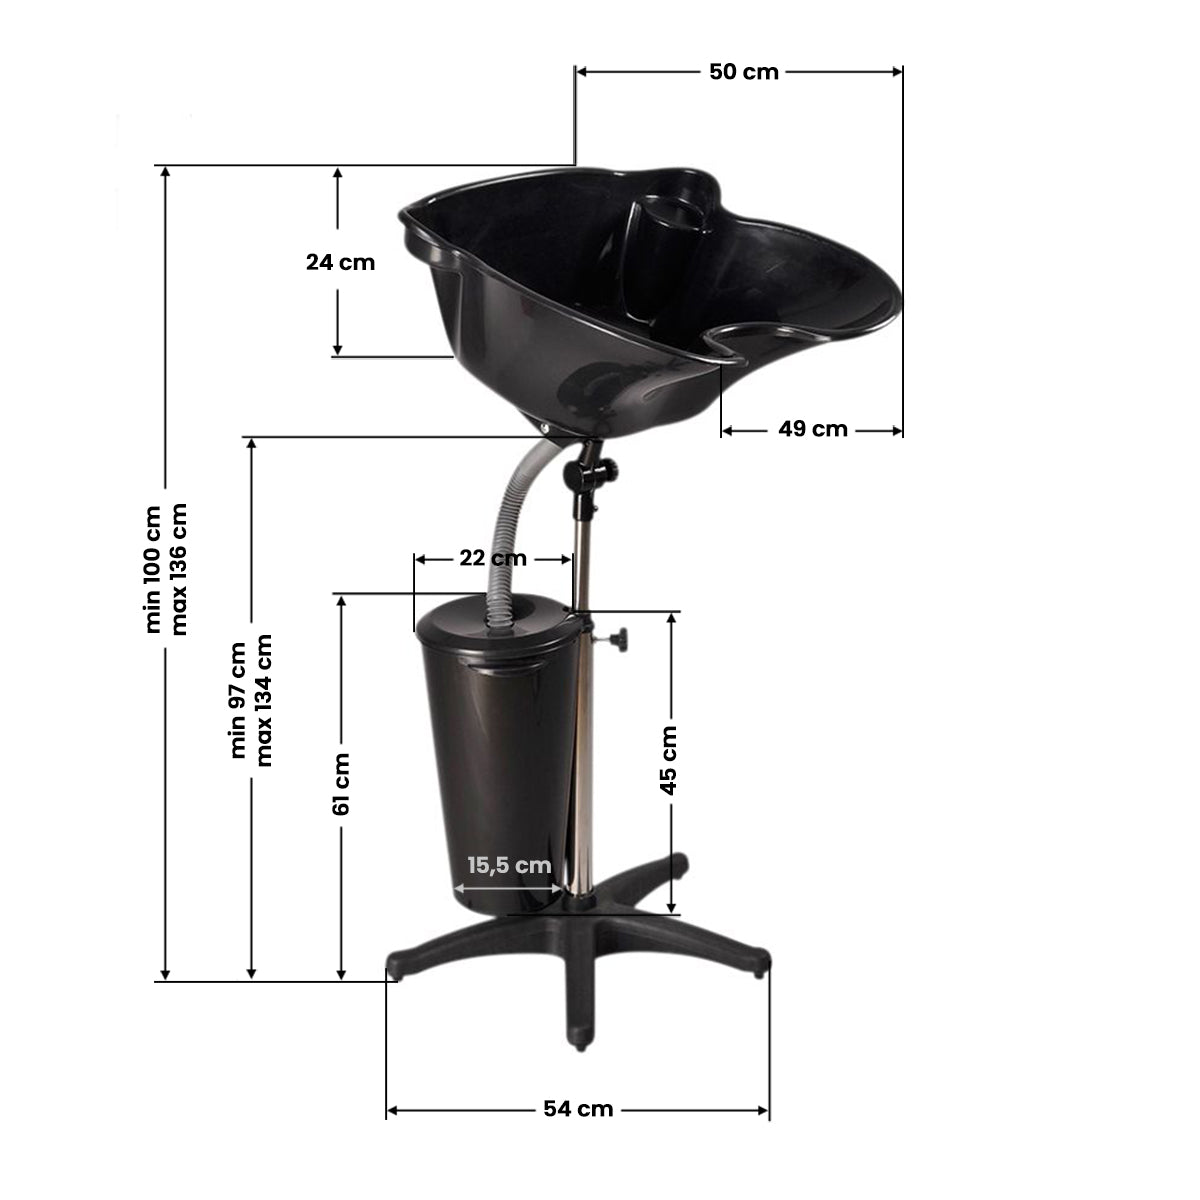 Gabbiano portable barbershop with ft42-1 tank